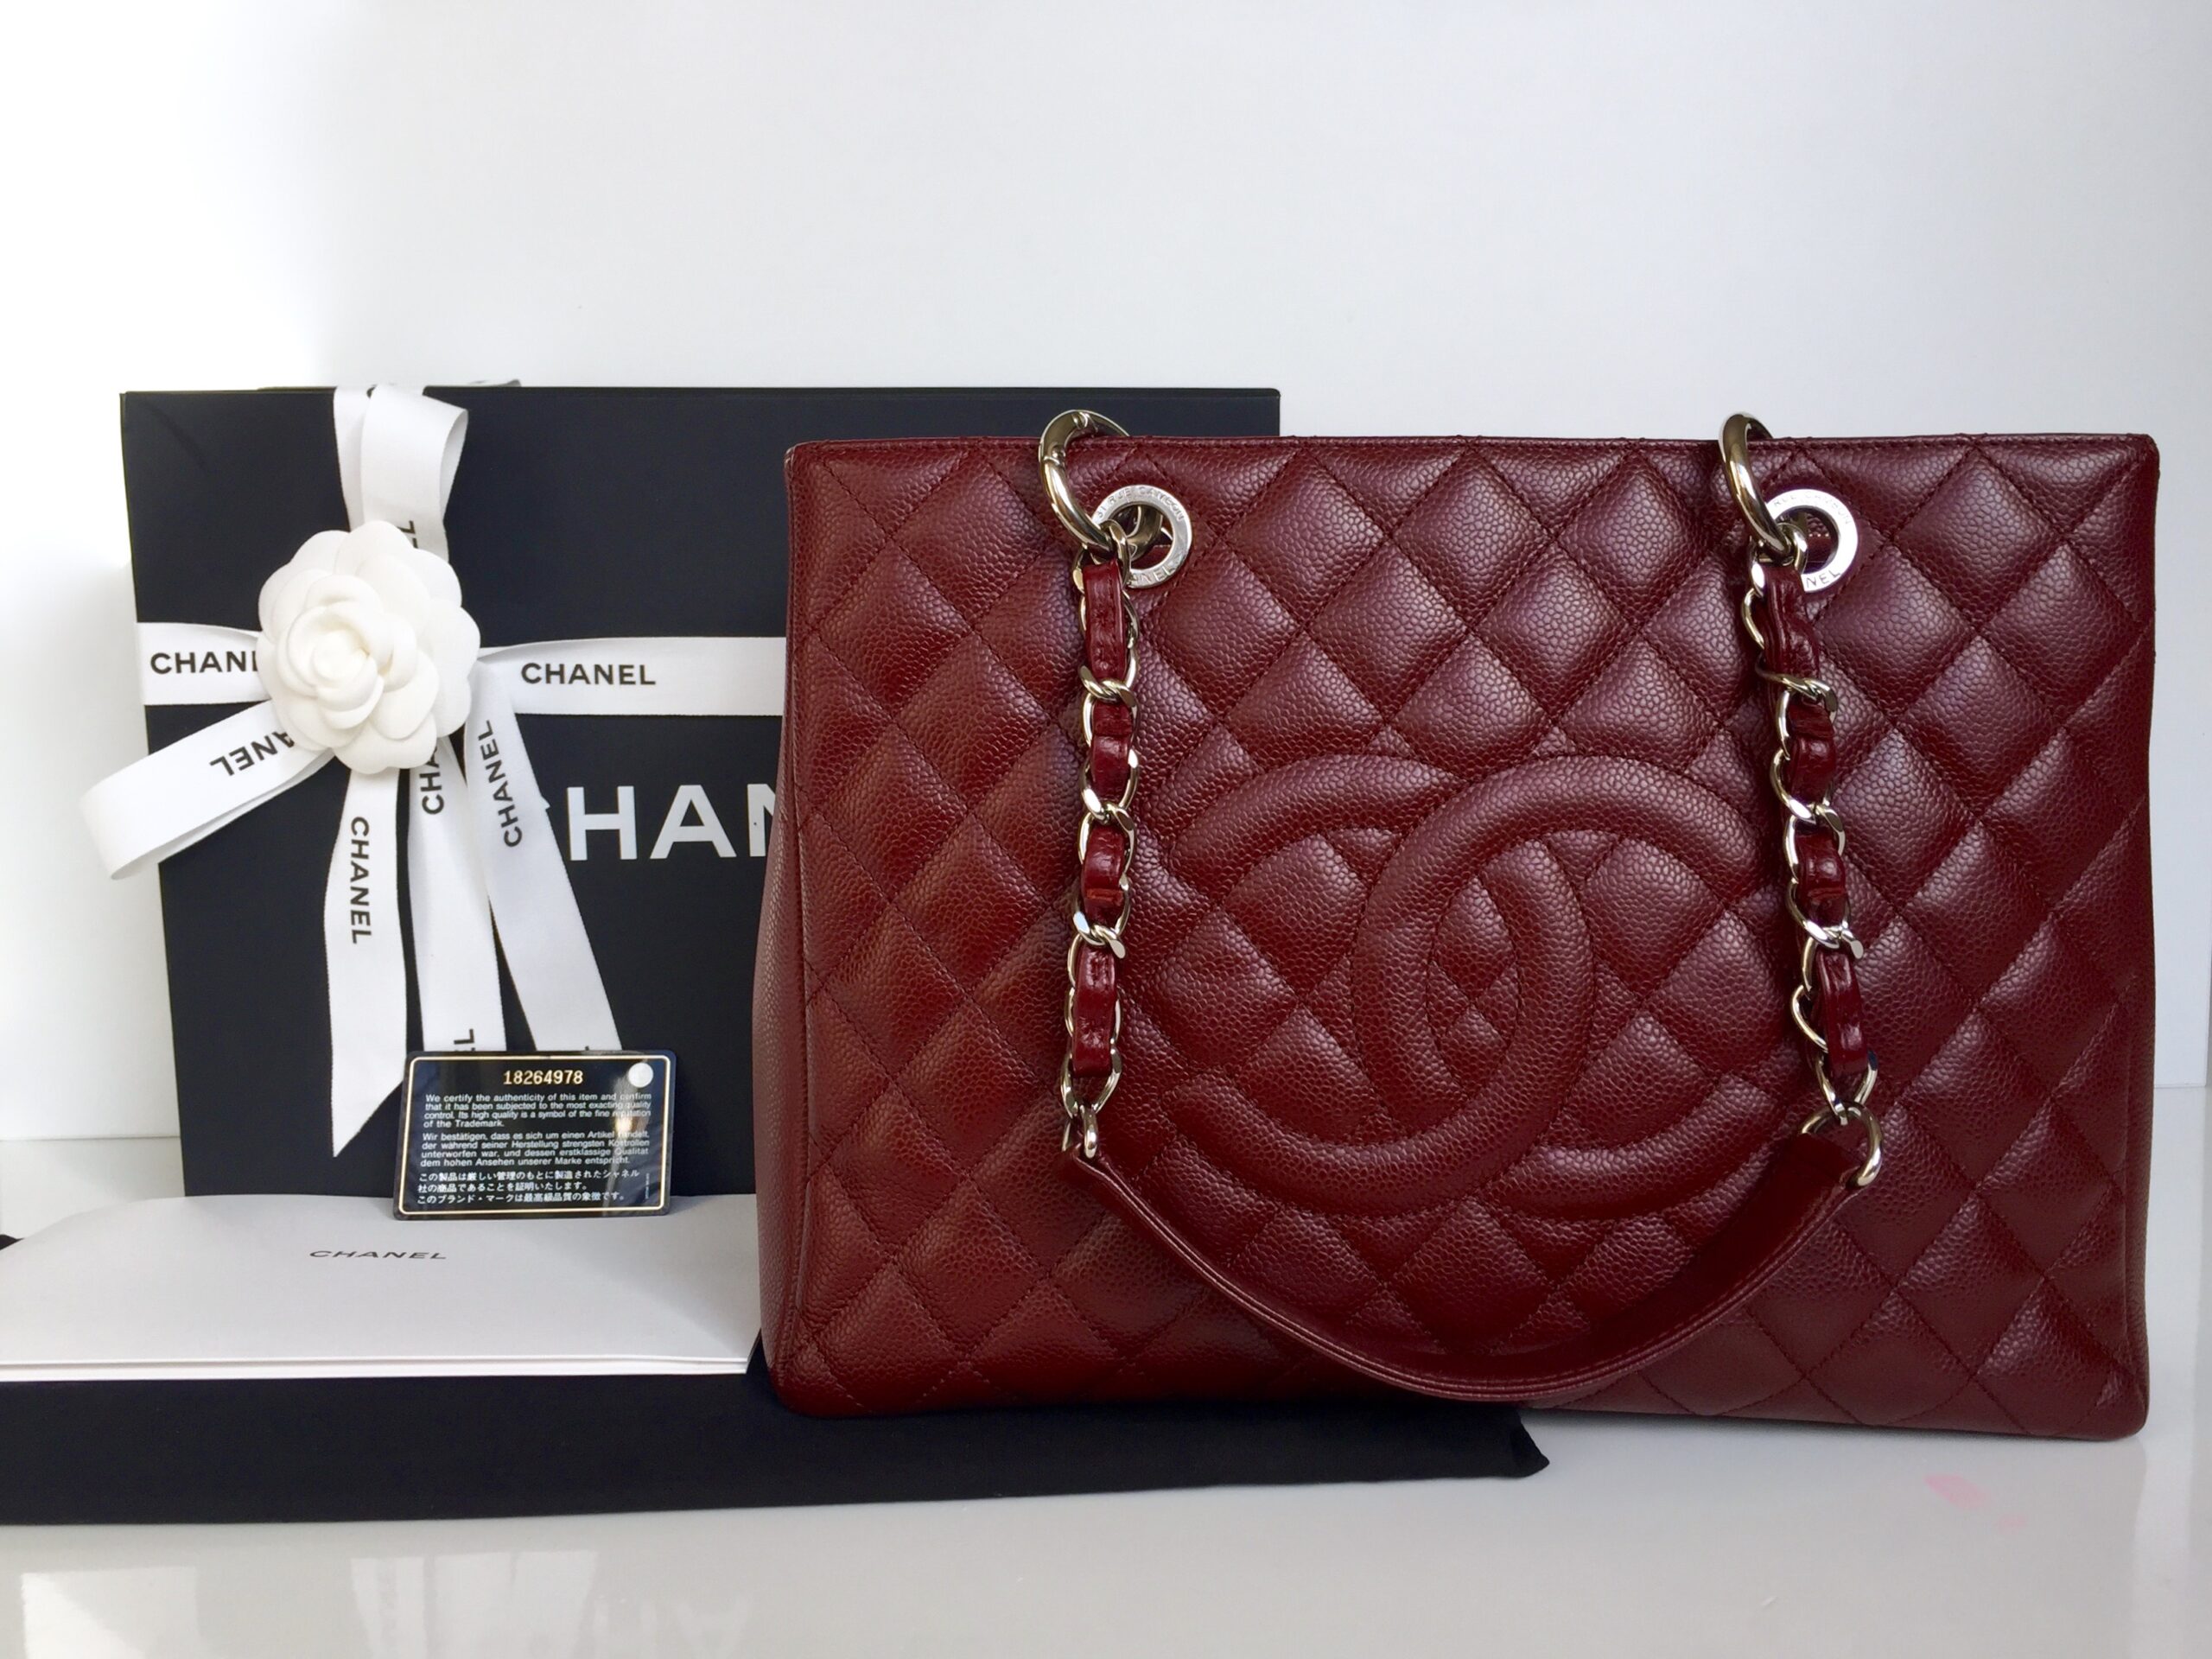 CHANEL Grand Shopping GST Caviar Leather Tote Bag Maroon